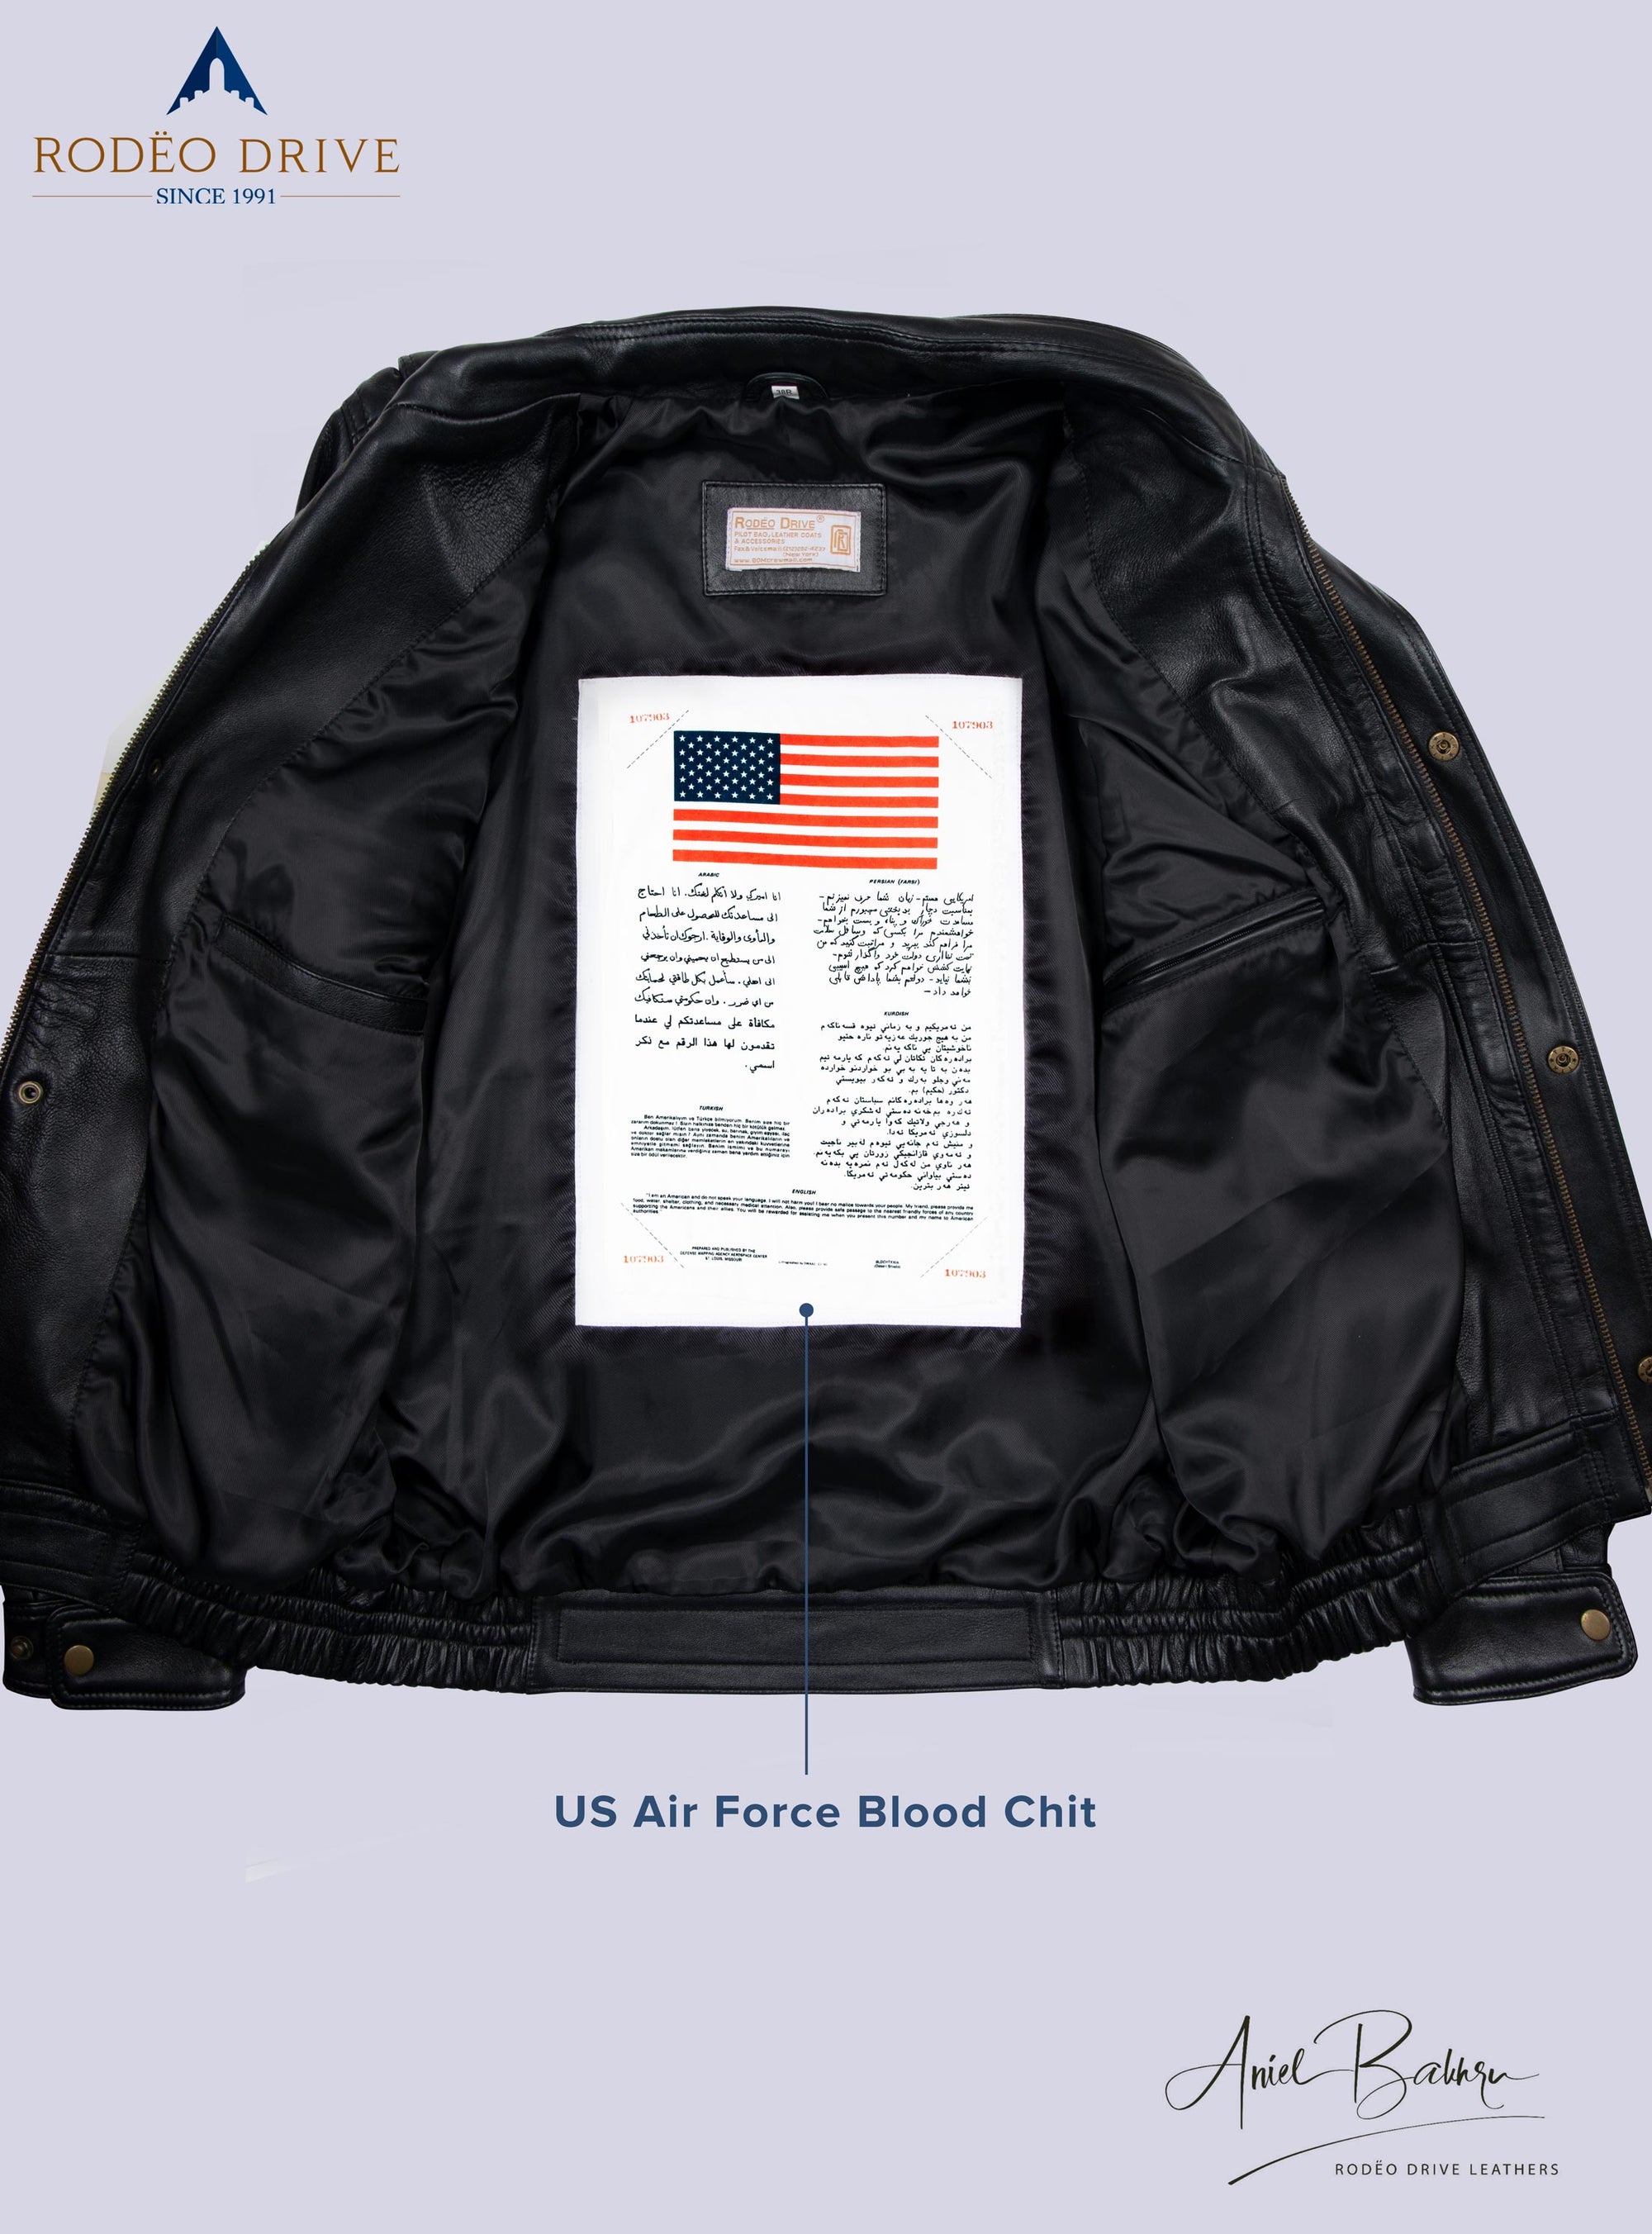 Inside image of BOMBER JACKET . Inside it USA air force blood chit is sewed